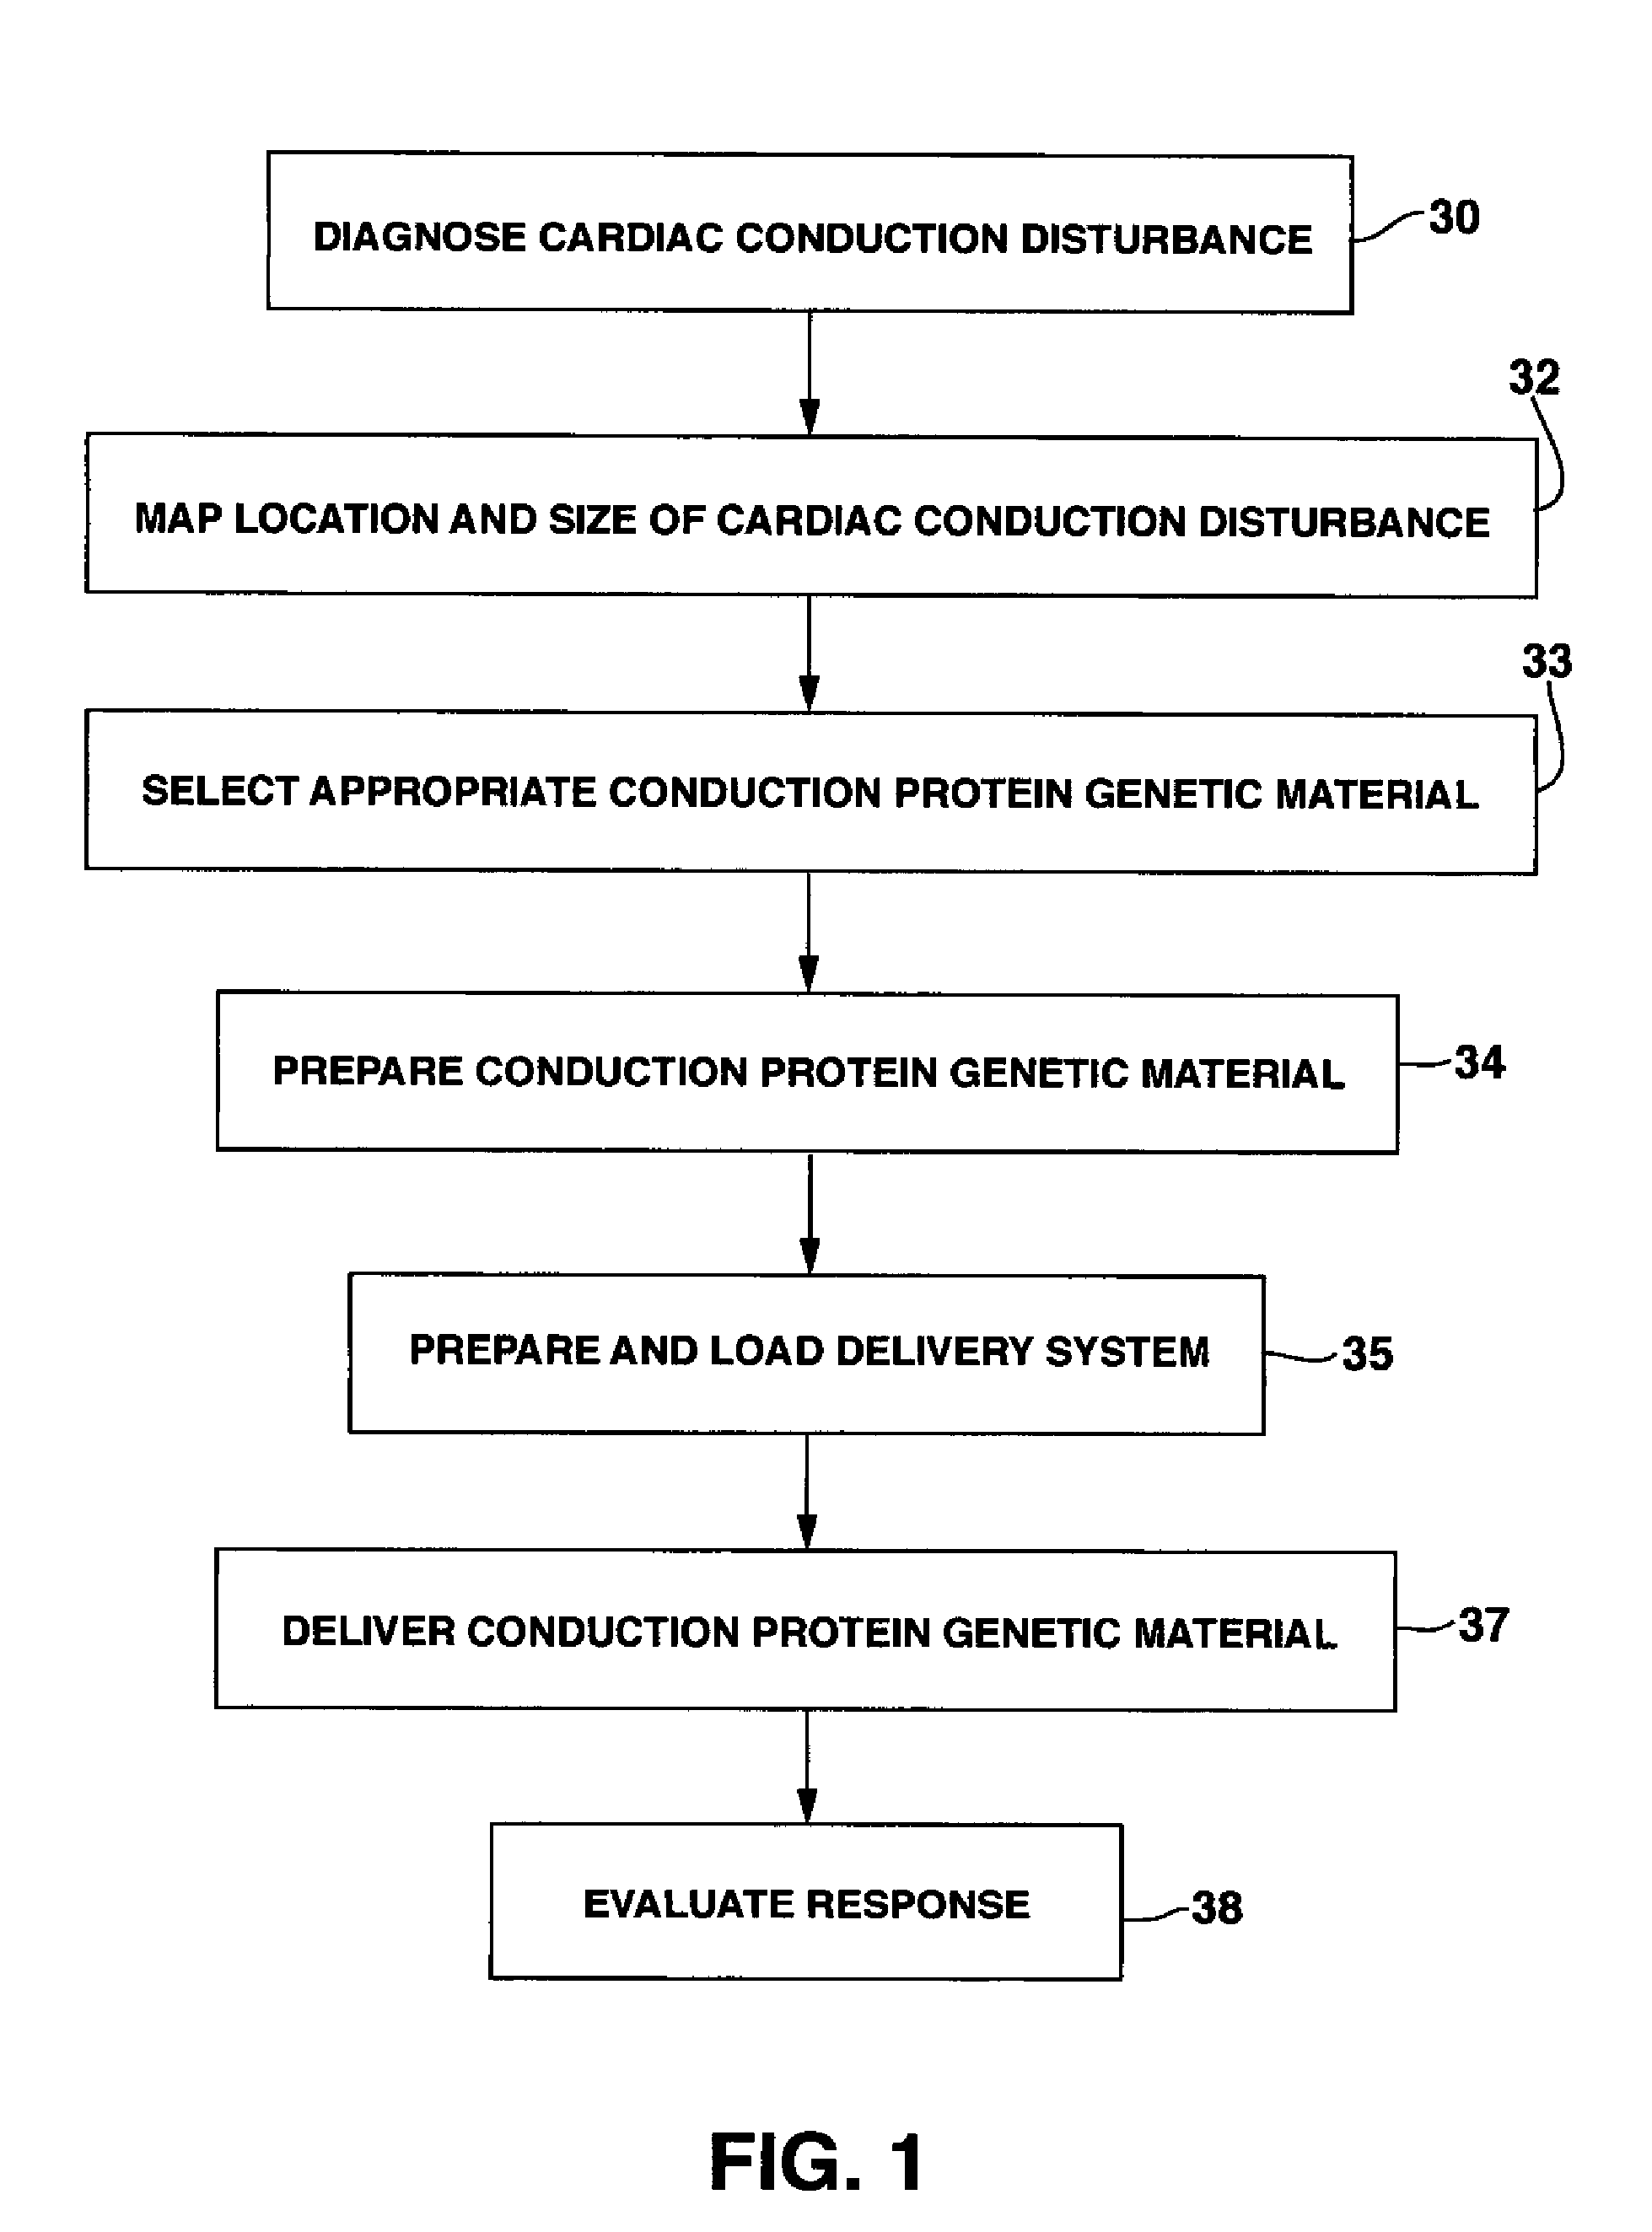 System and method for genetically treating cardiac conduction disturbances